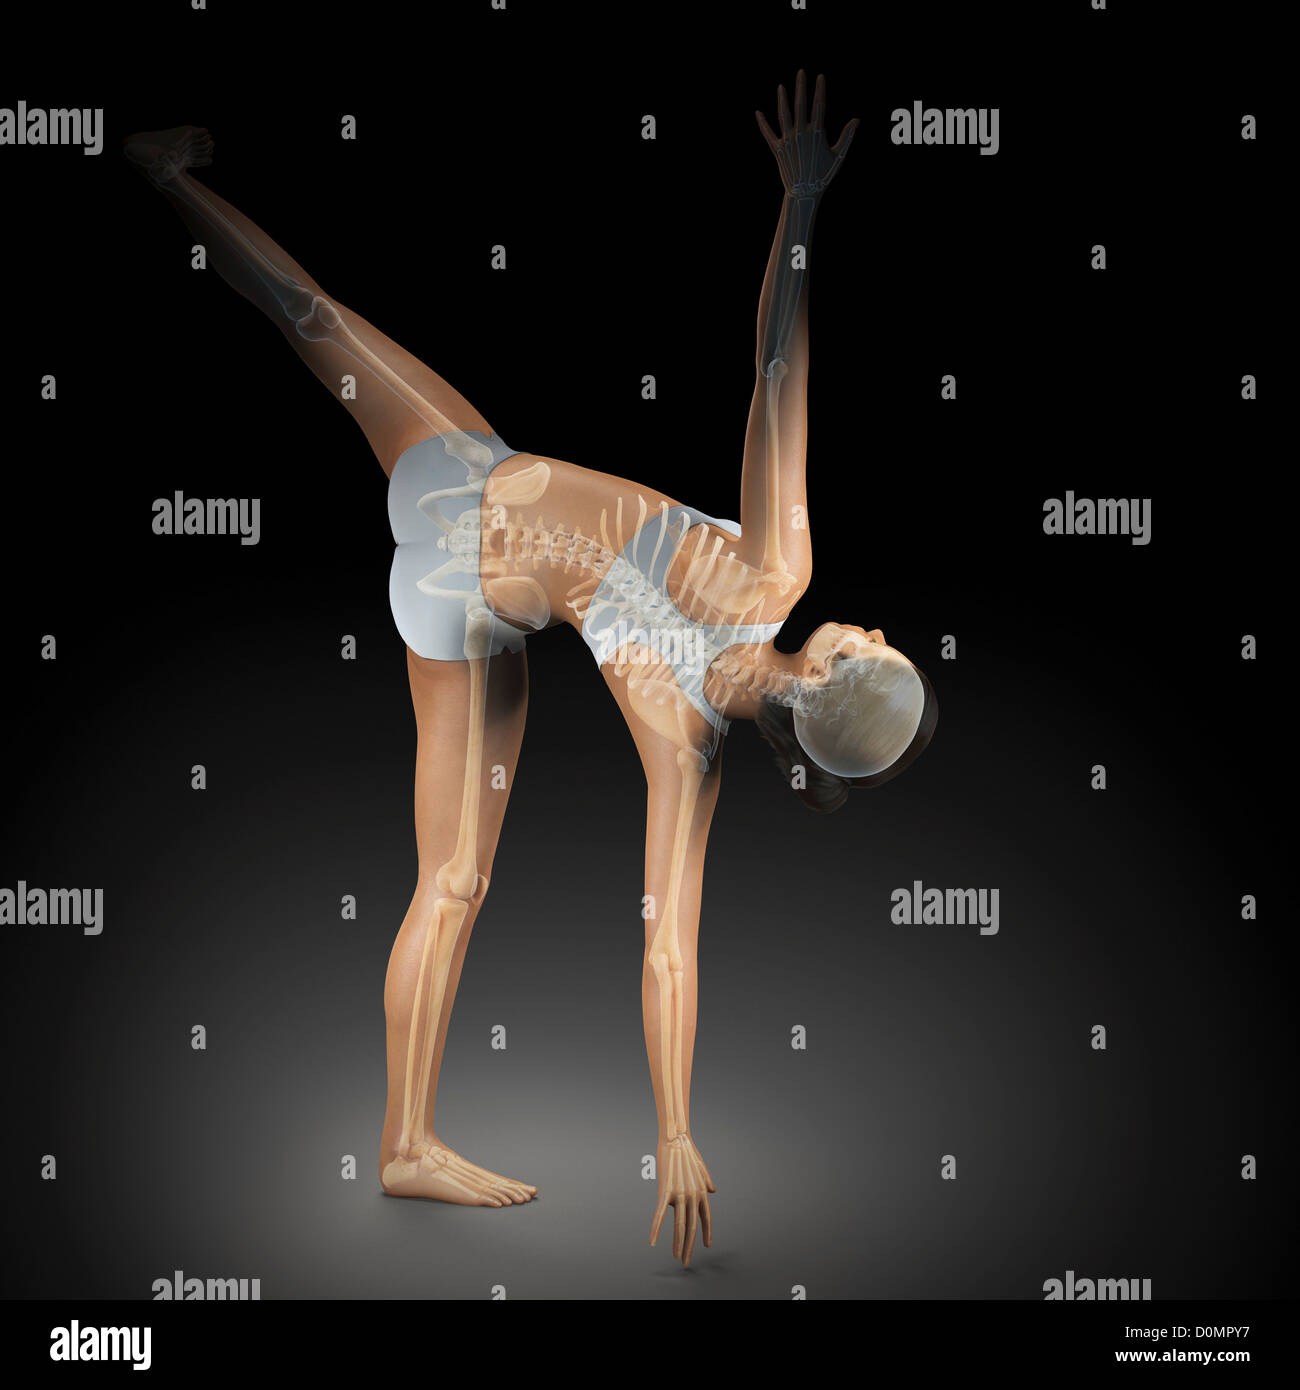 Skeleton layered over a female body in half moon pose showing the skeletal alignment of this particular yoga posture. Stock Photo